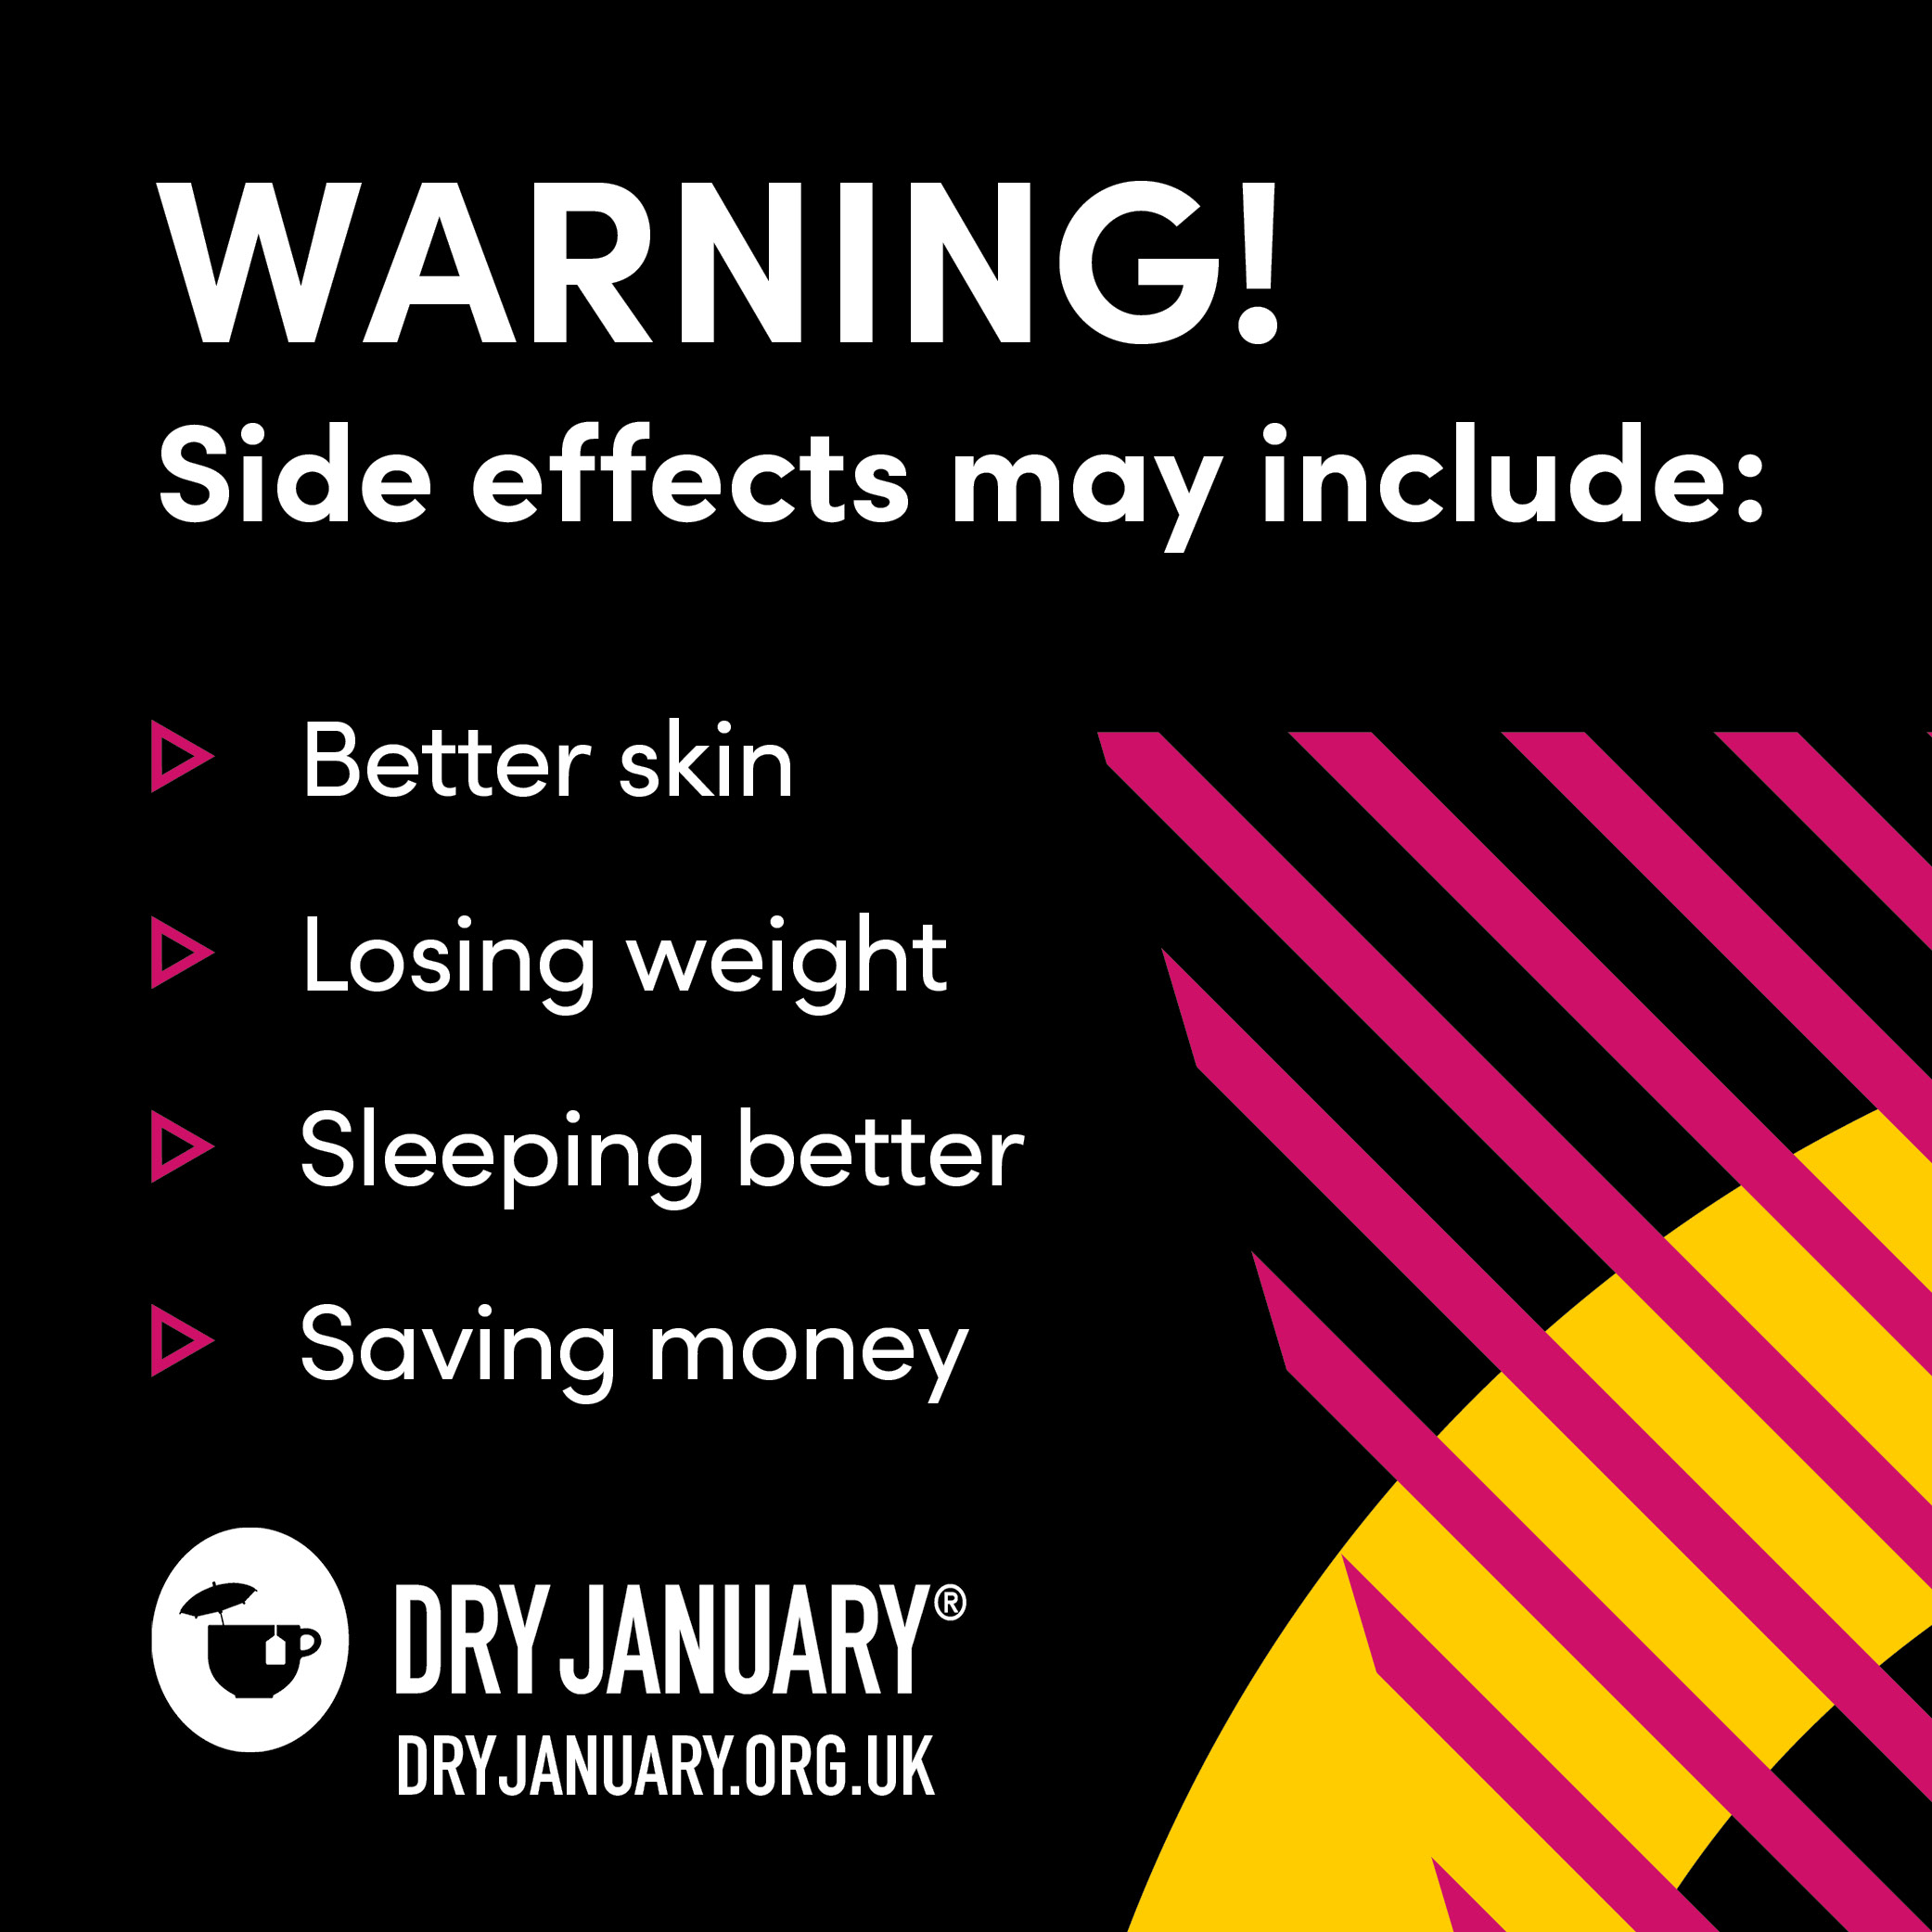 Community Pharmacy South Central :: 'Dry January' - campaign launched